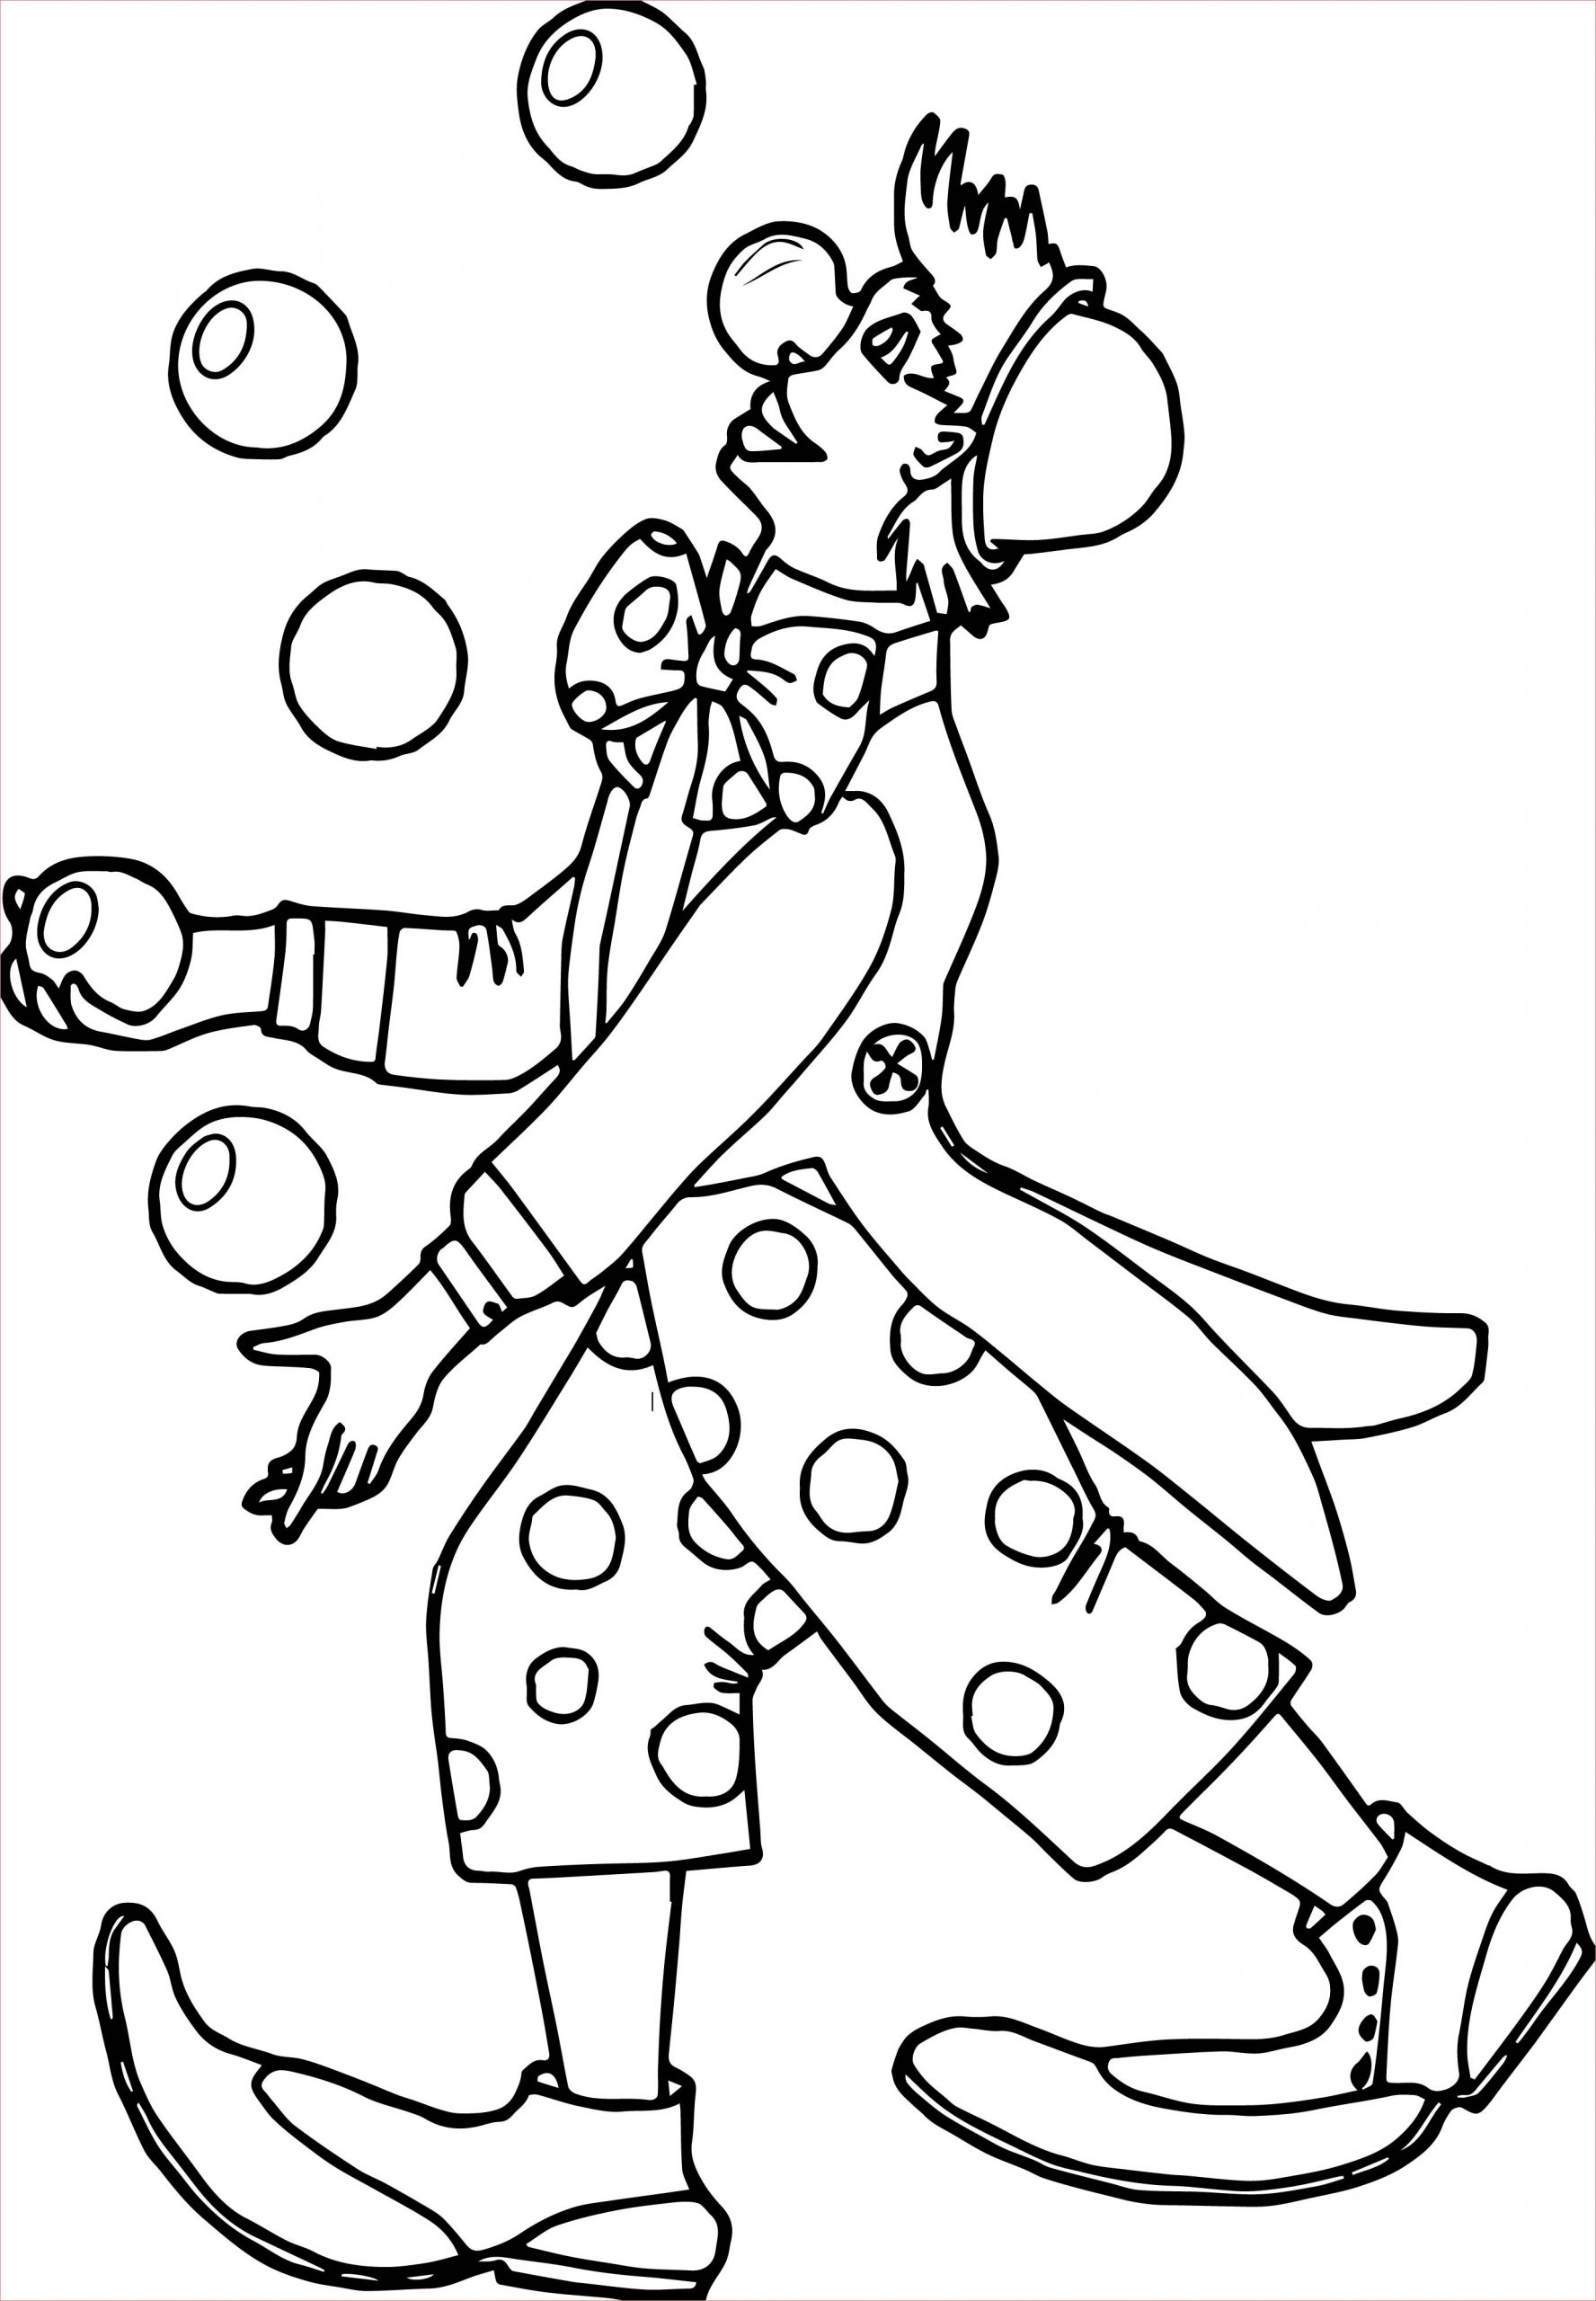 clown ball coloring page 2